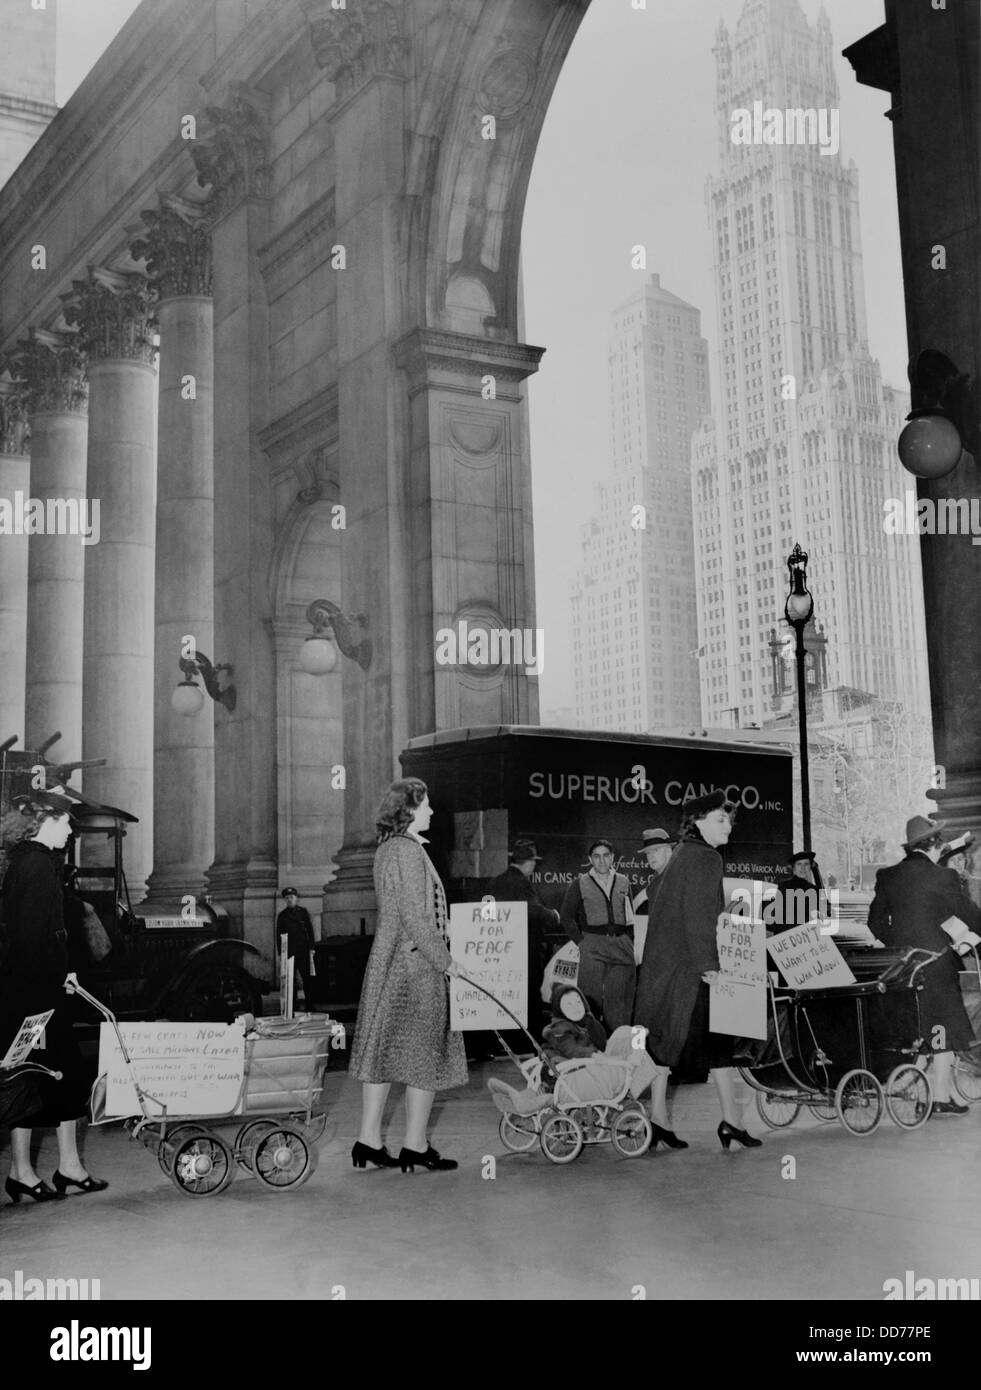 Mothers protest to keep America out of war, Nov. 8, 1939. Women with baby carriages marching for peace in New York City, with Stock Photo